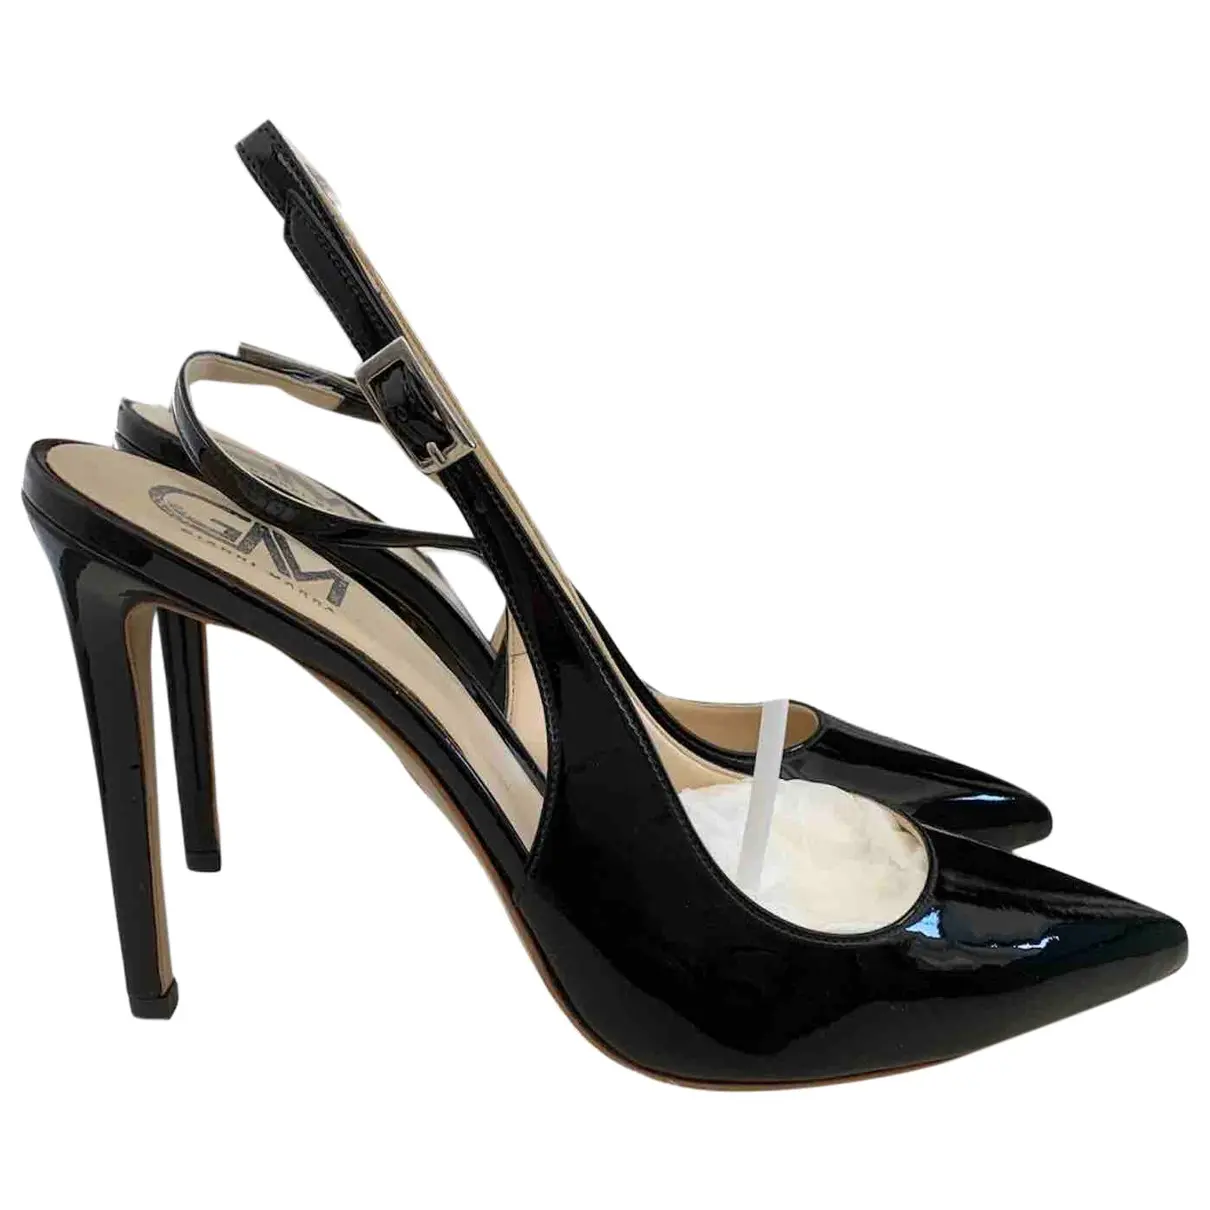 Patent leather heels Gianni Marra